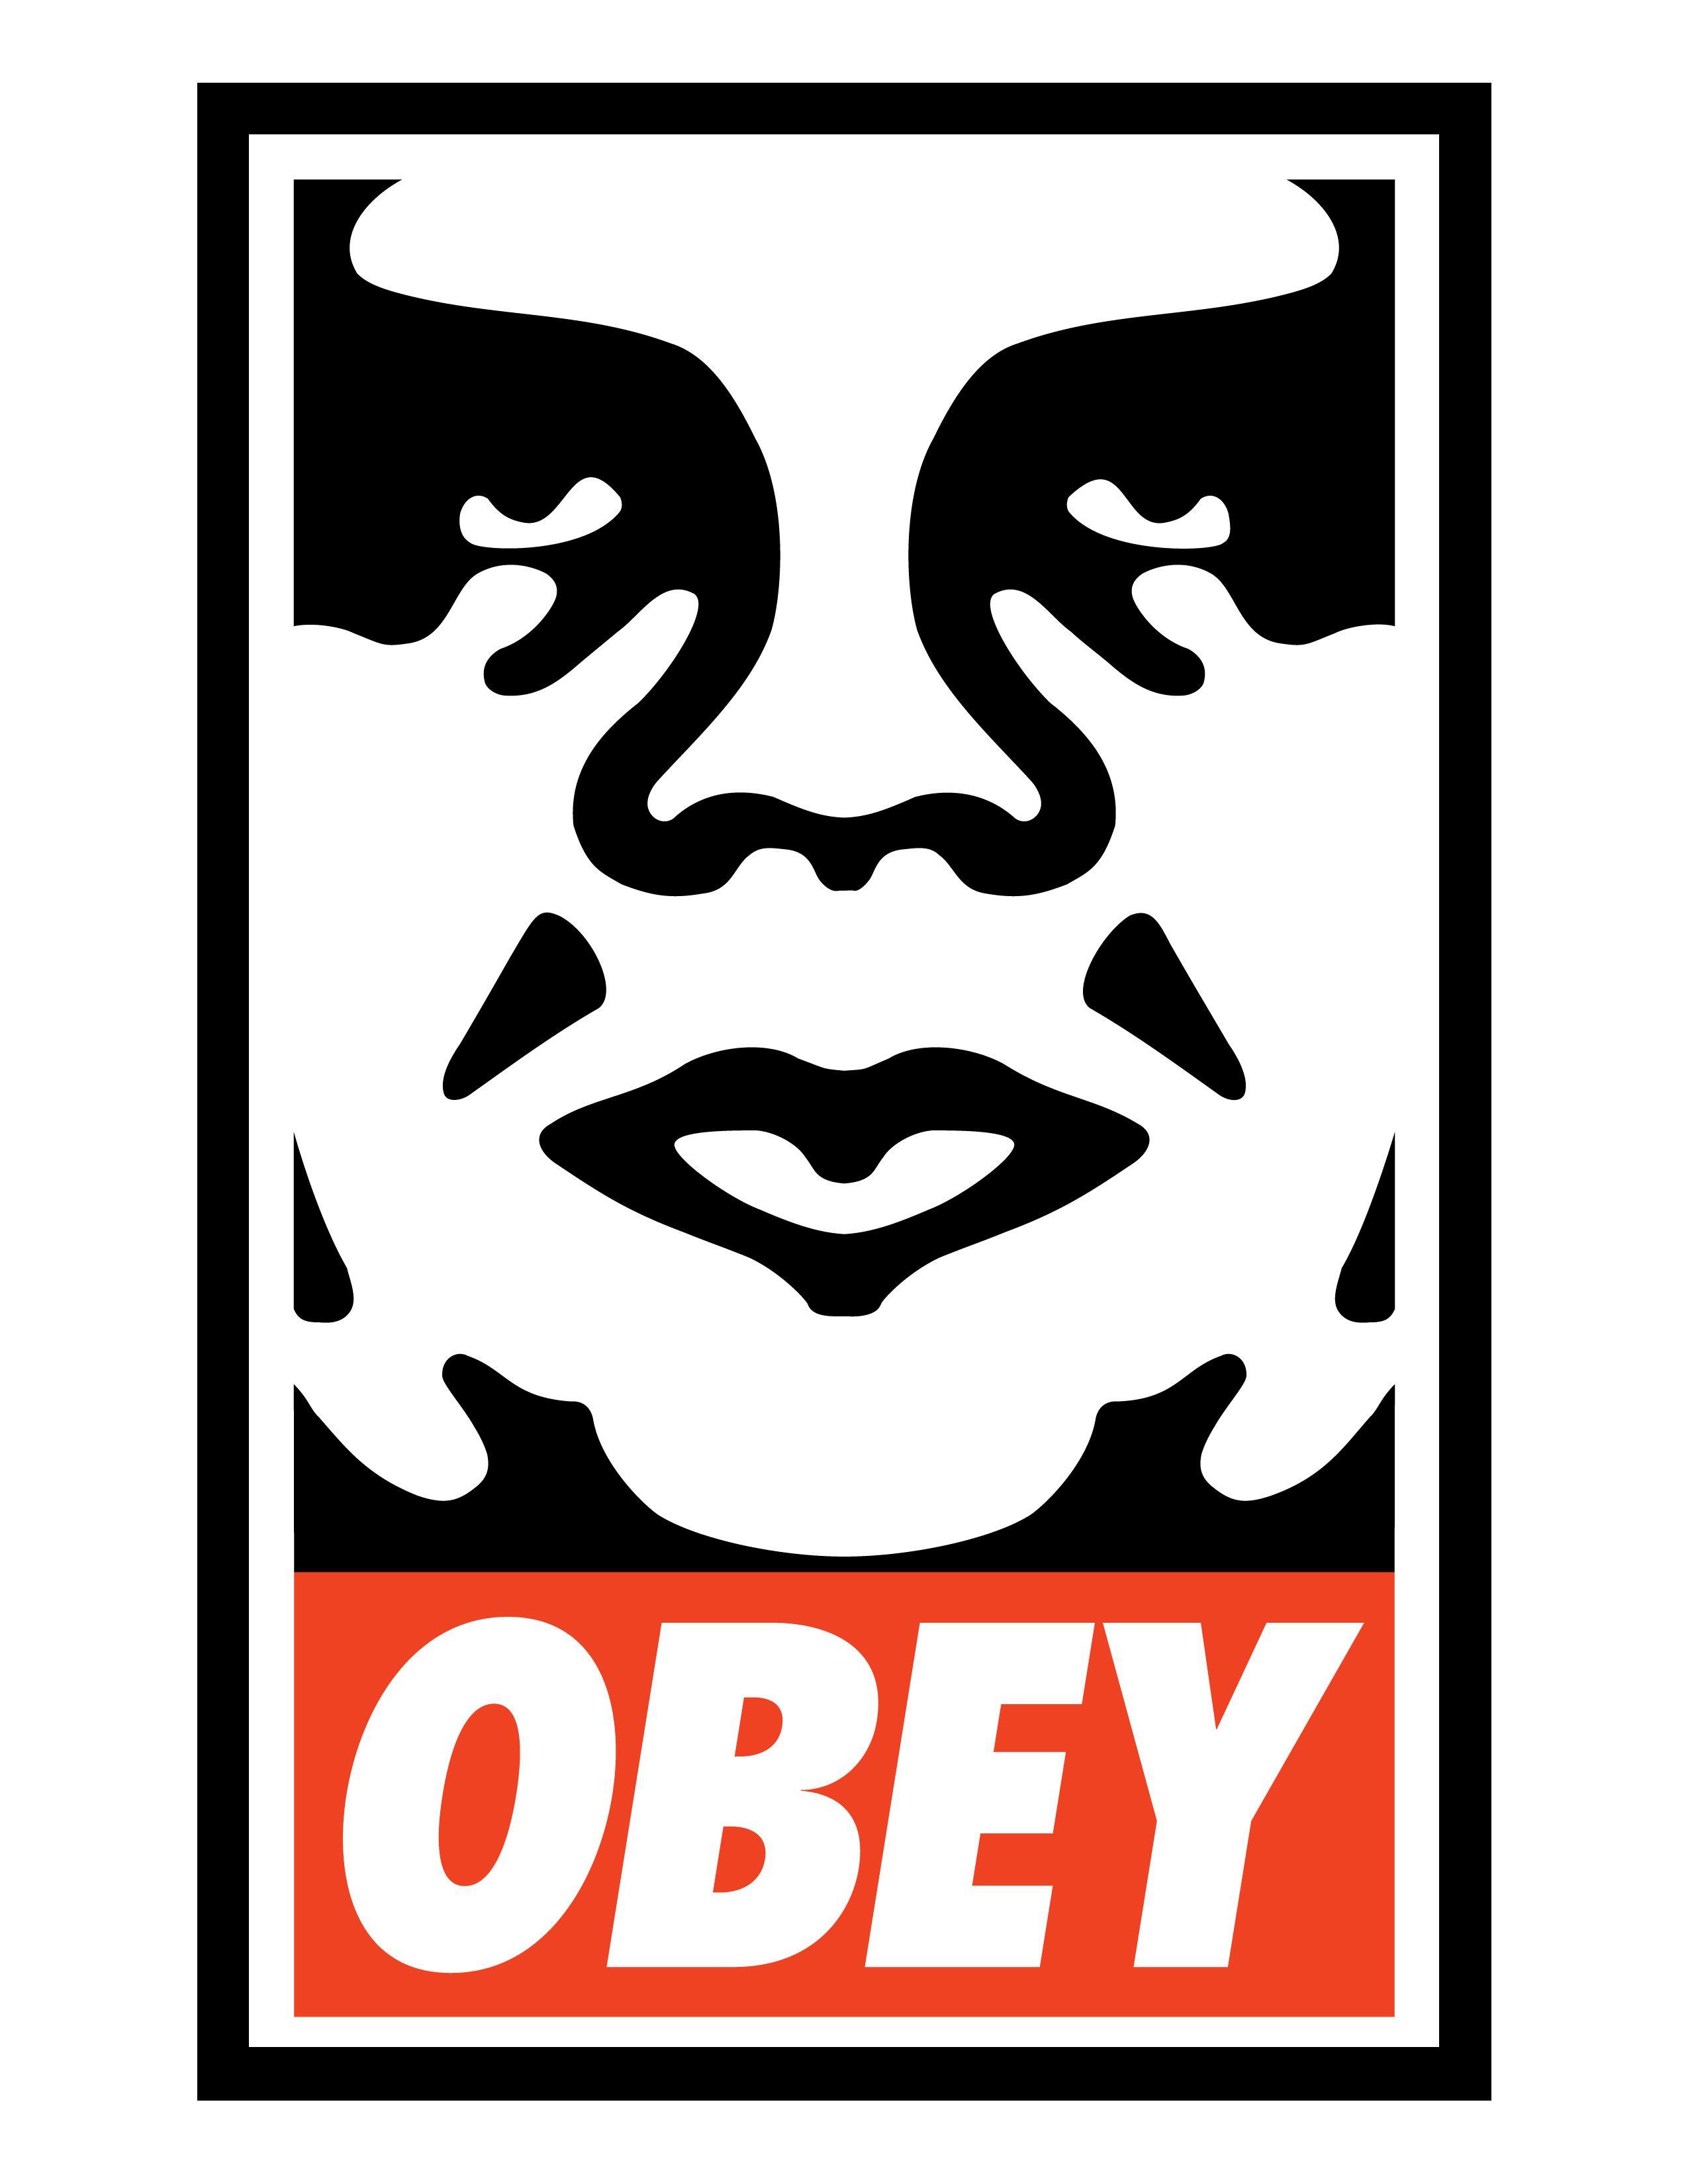 Andre the Giant Obey Logo - OBEY: The Art of Phenomenology | Stakeholders:Uncensored